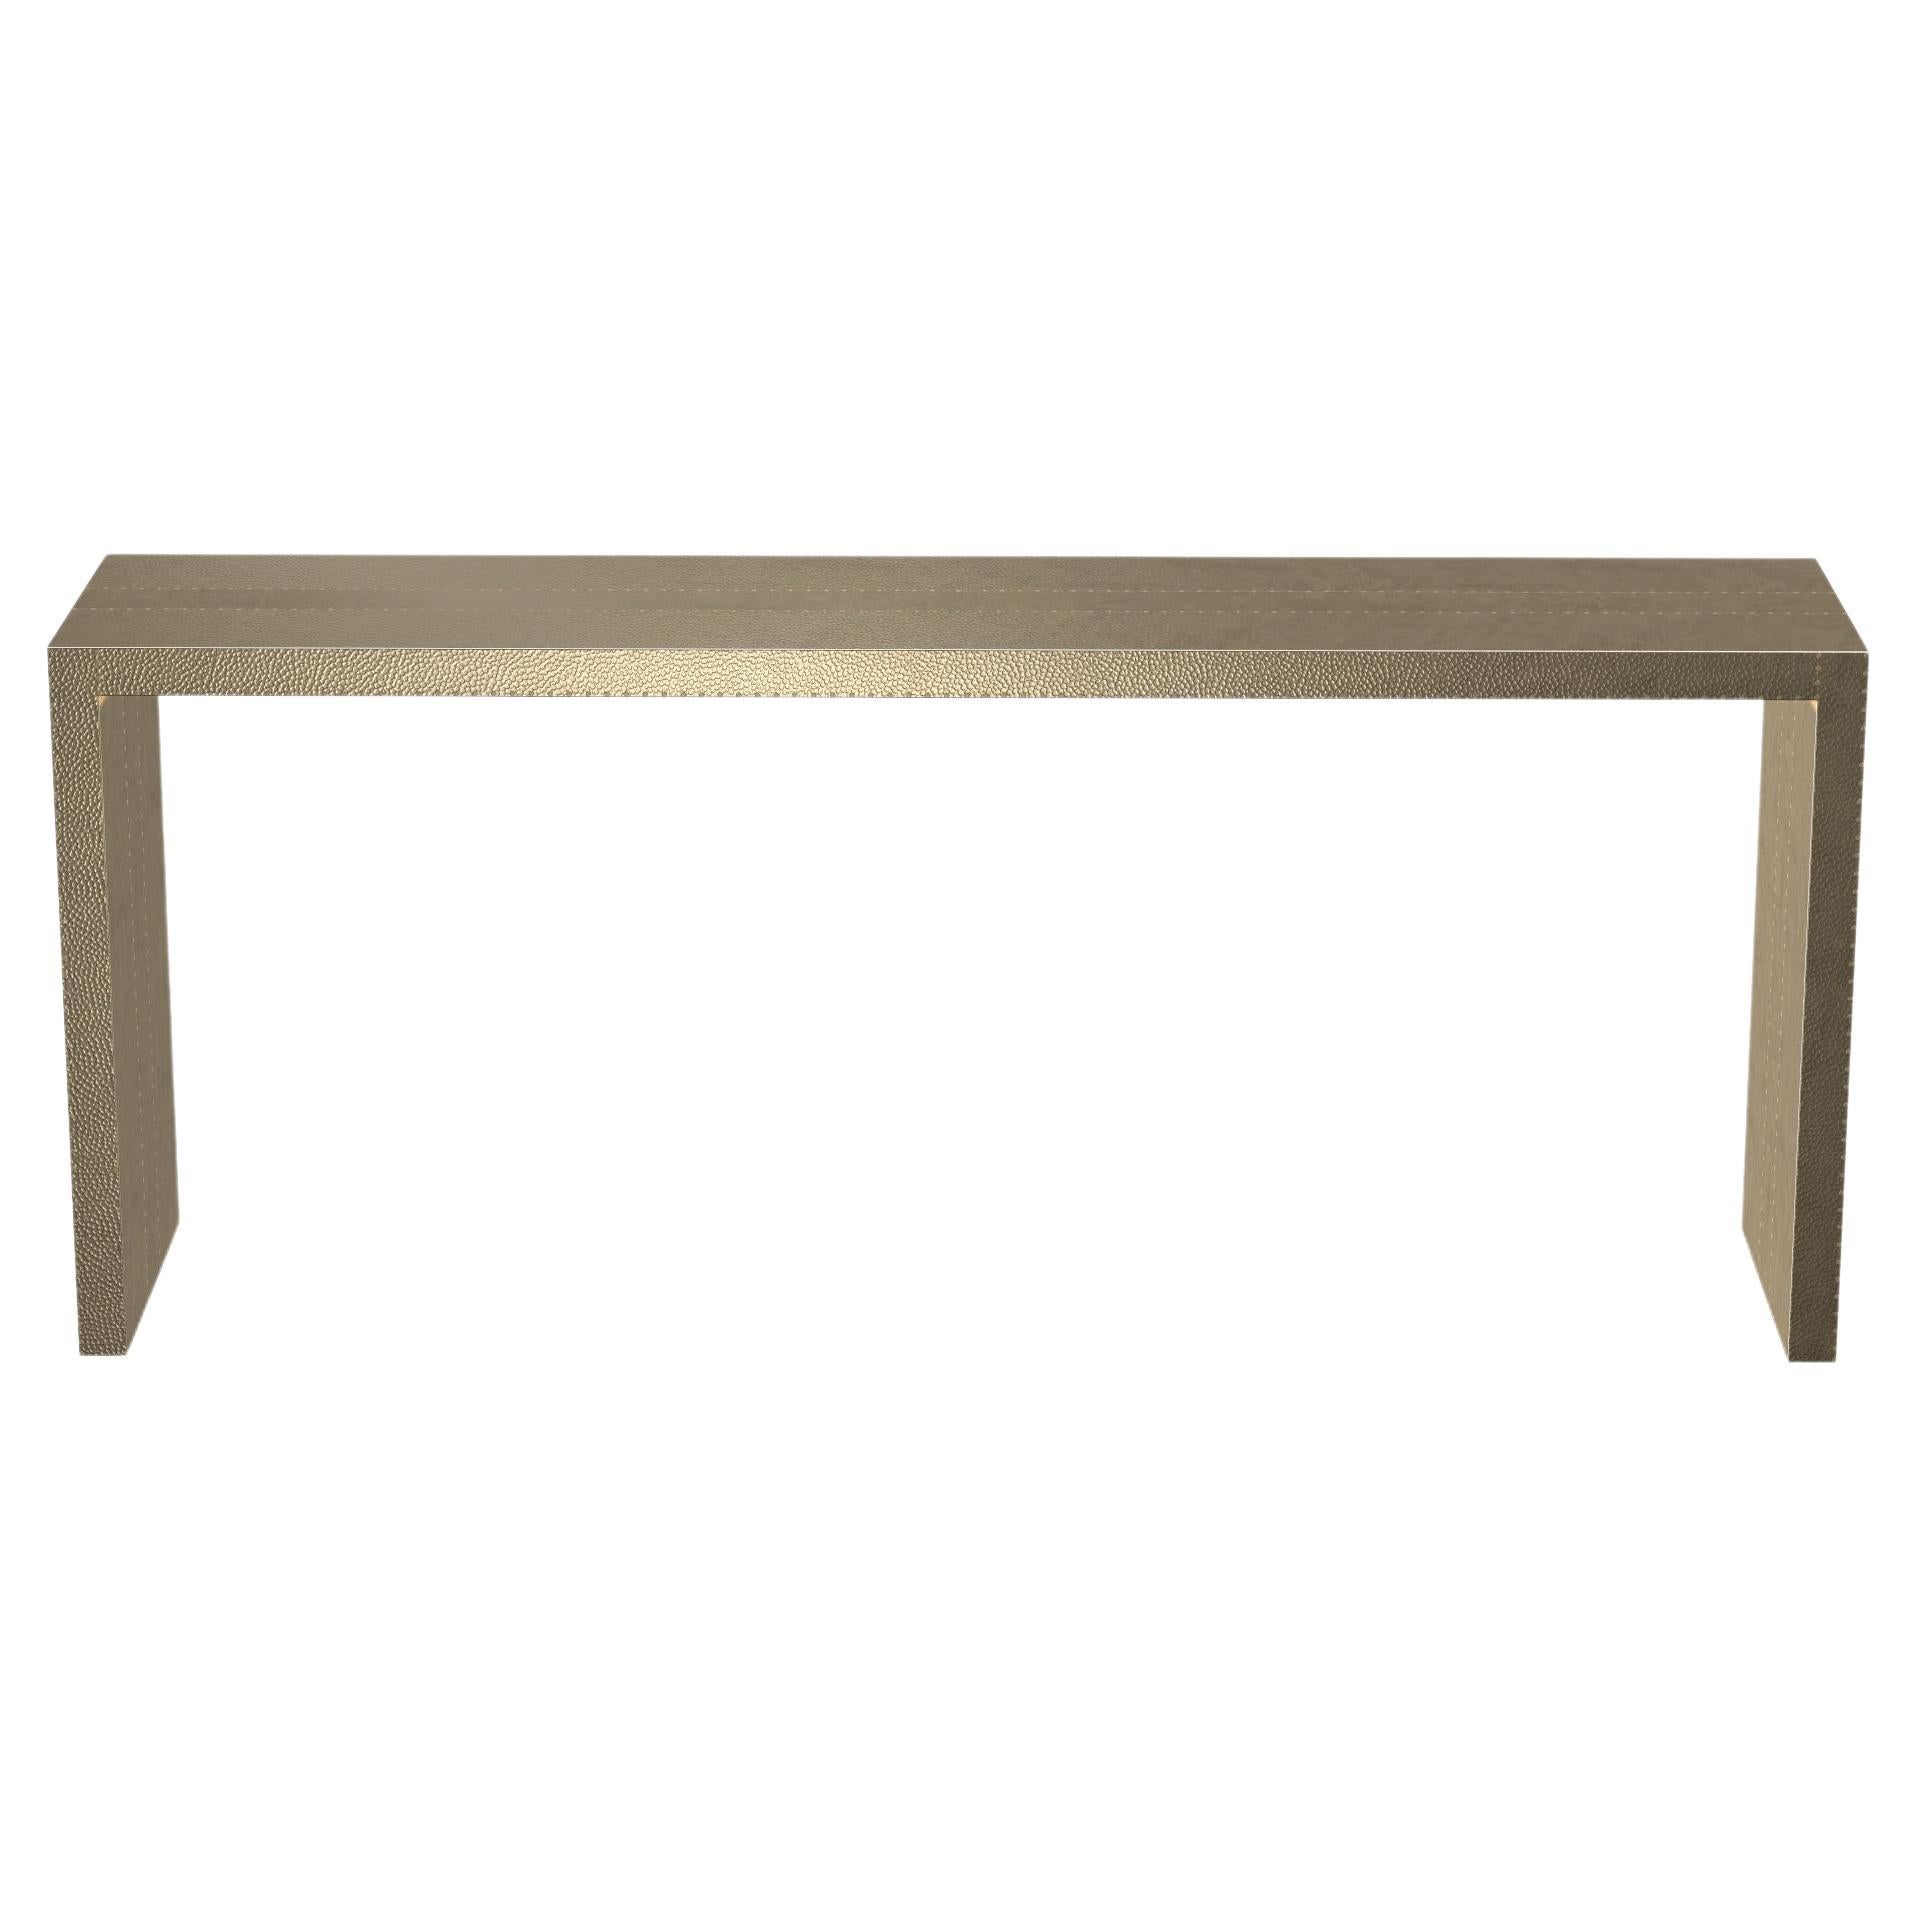 Art Deco Rectangular Console Tables Mid. Hammered Brass by Alison Spear For Sale